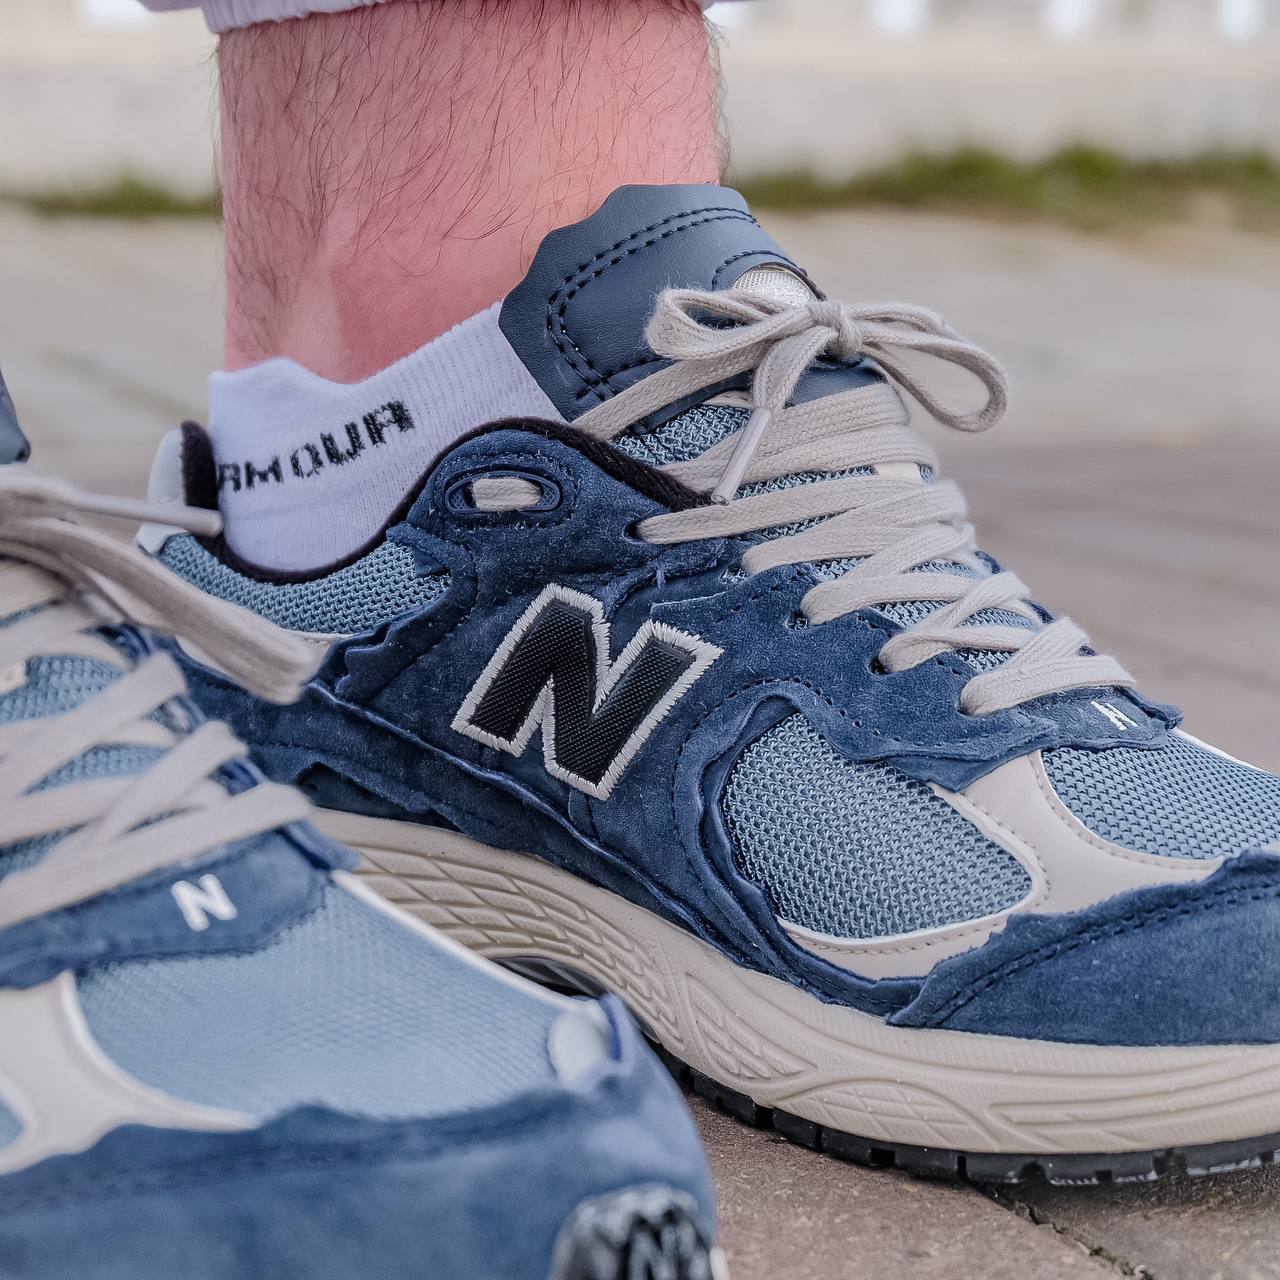 Stay Ahead of the Style Game with New Balance 2002R Bleu Sneakers